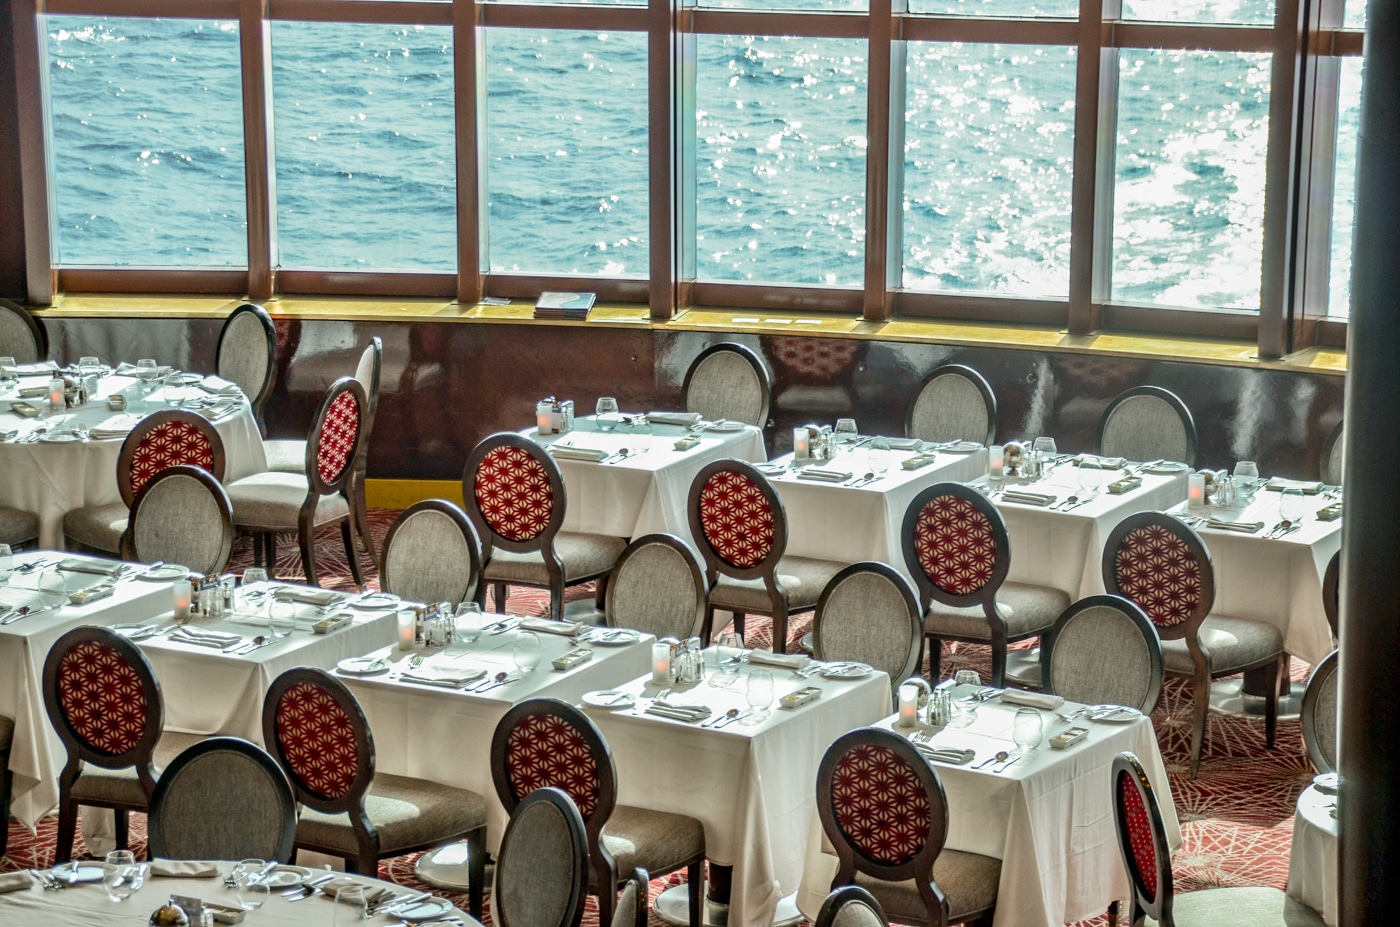 Cruise ship main dining room on Celebrity Infinity, Aft of ship